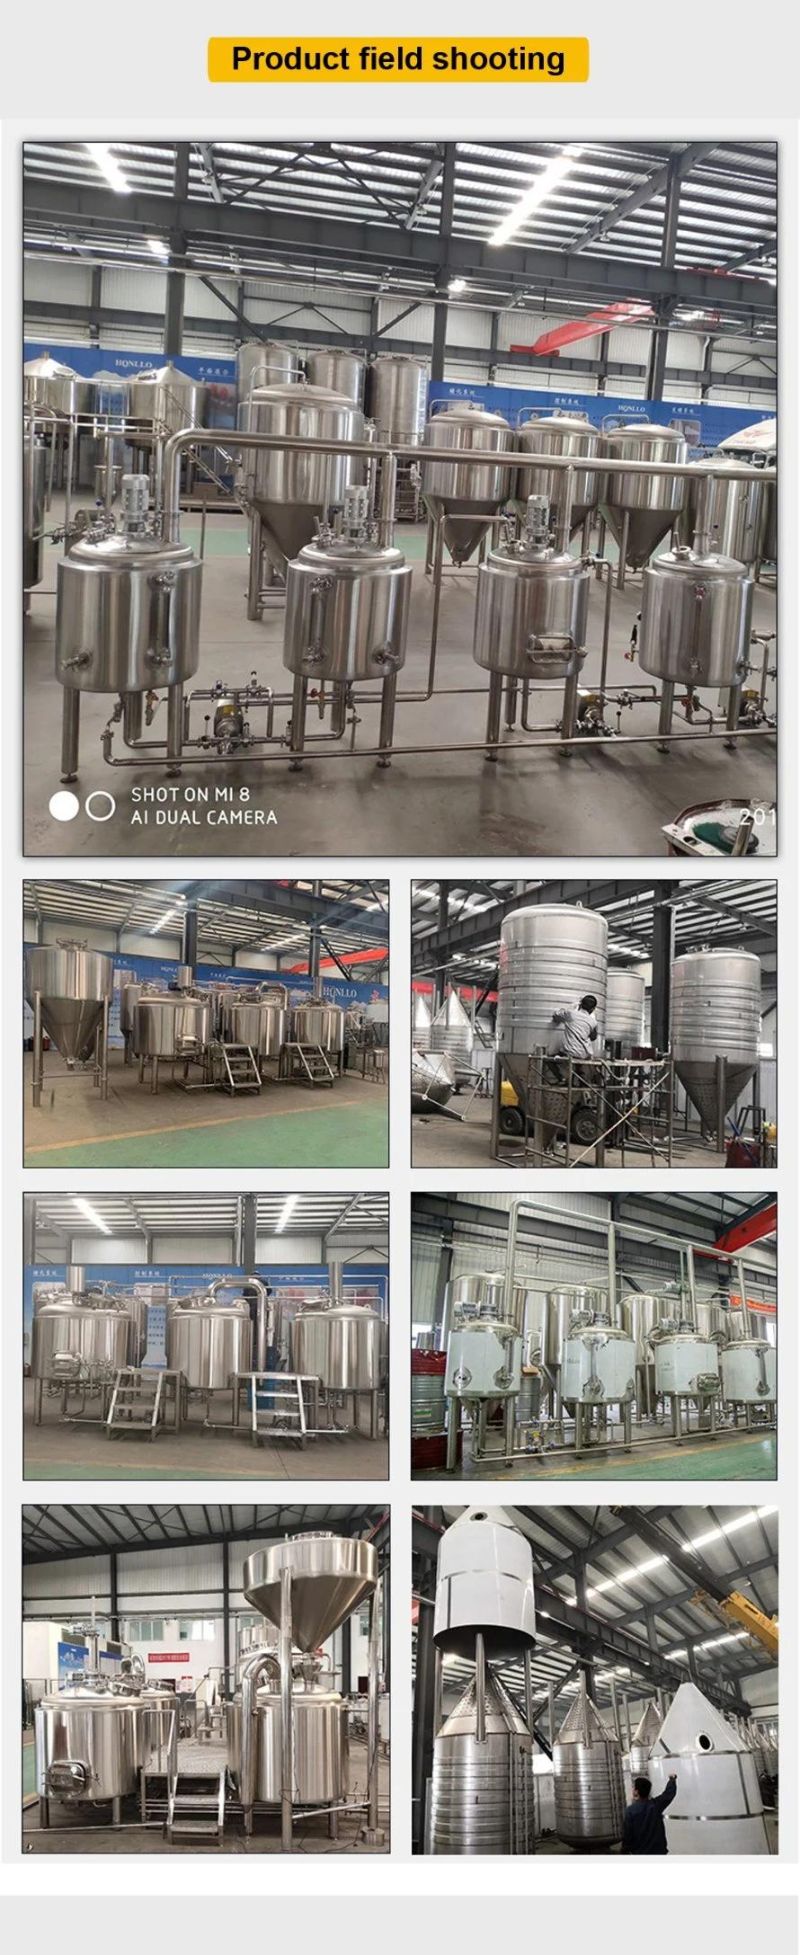 10bbl Beer Brewhouse Brewery Equipment with Steam Heating Boiling Kettle